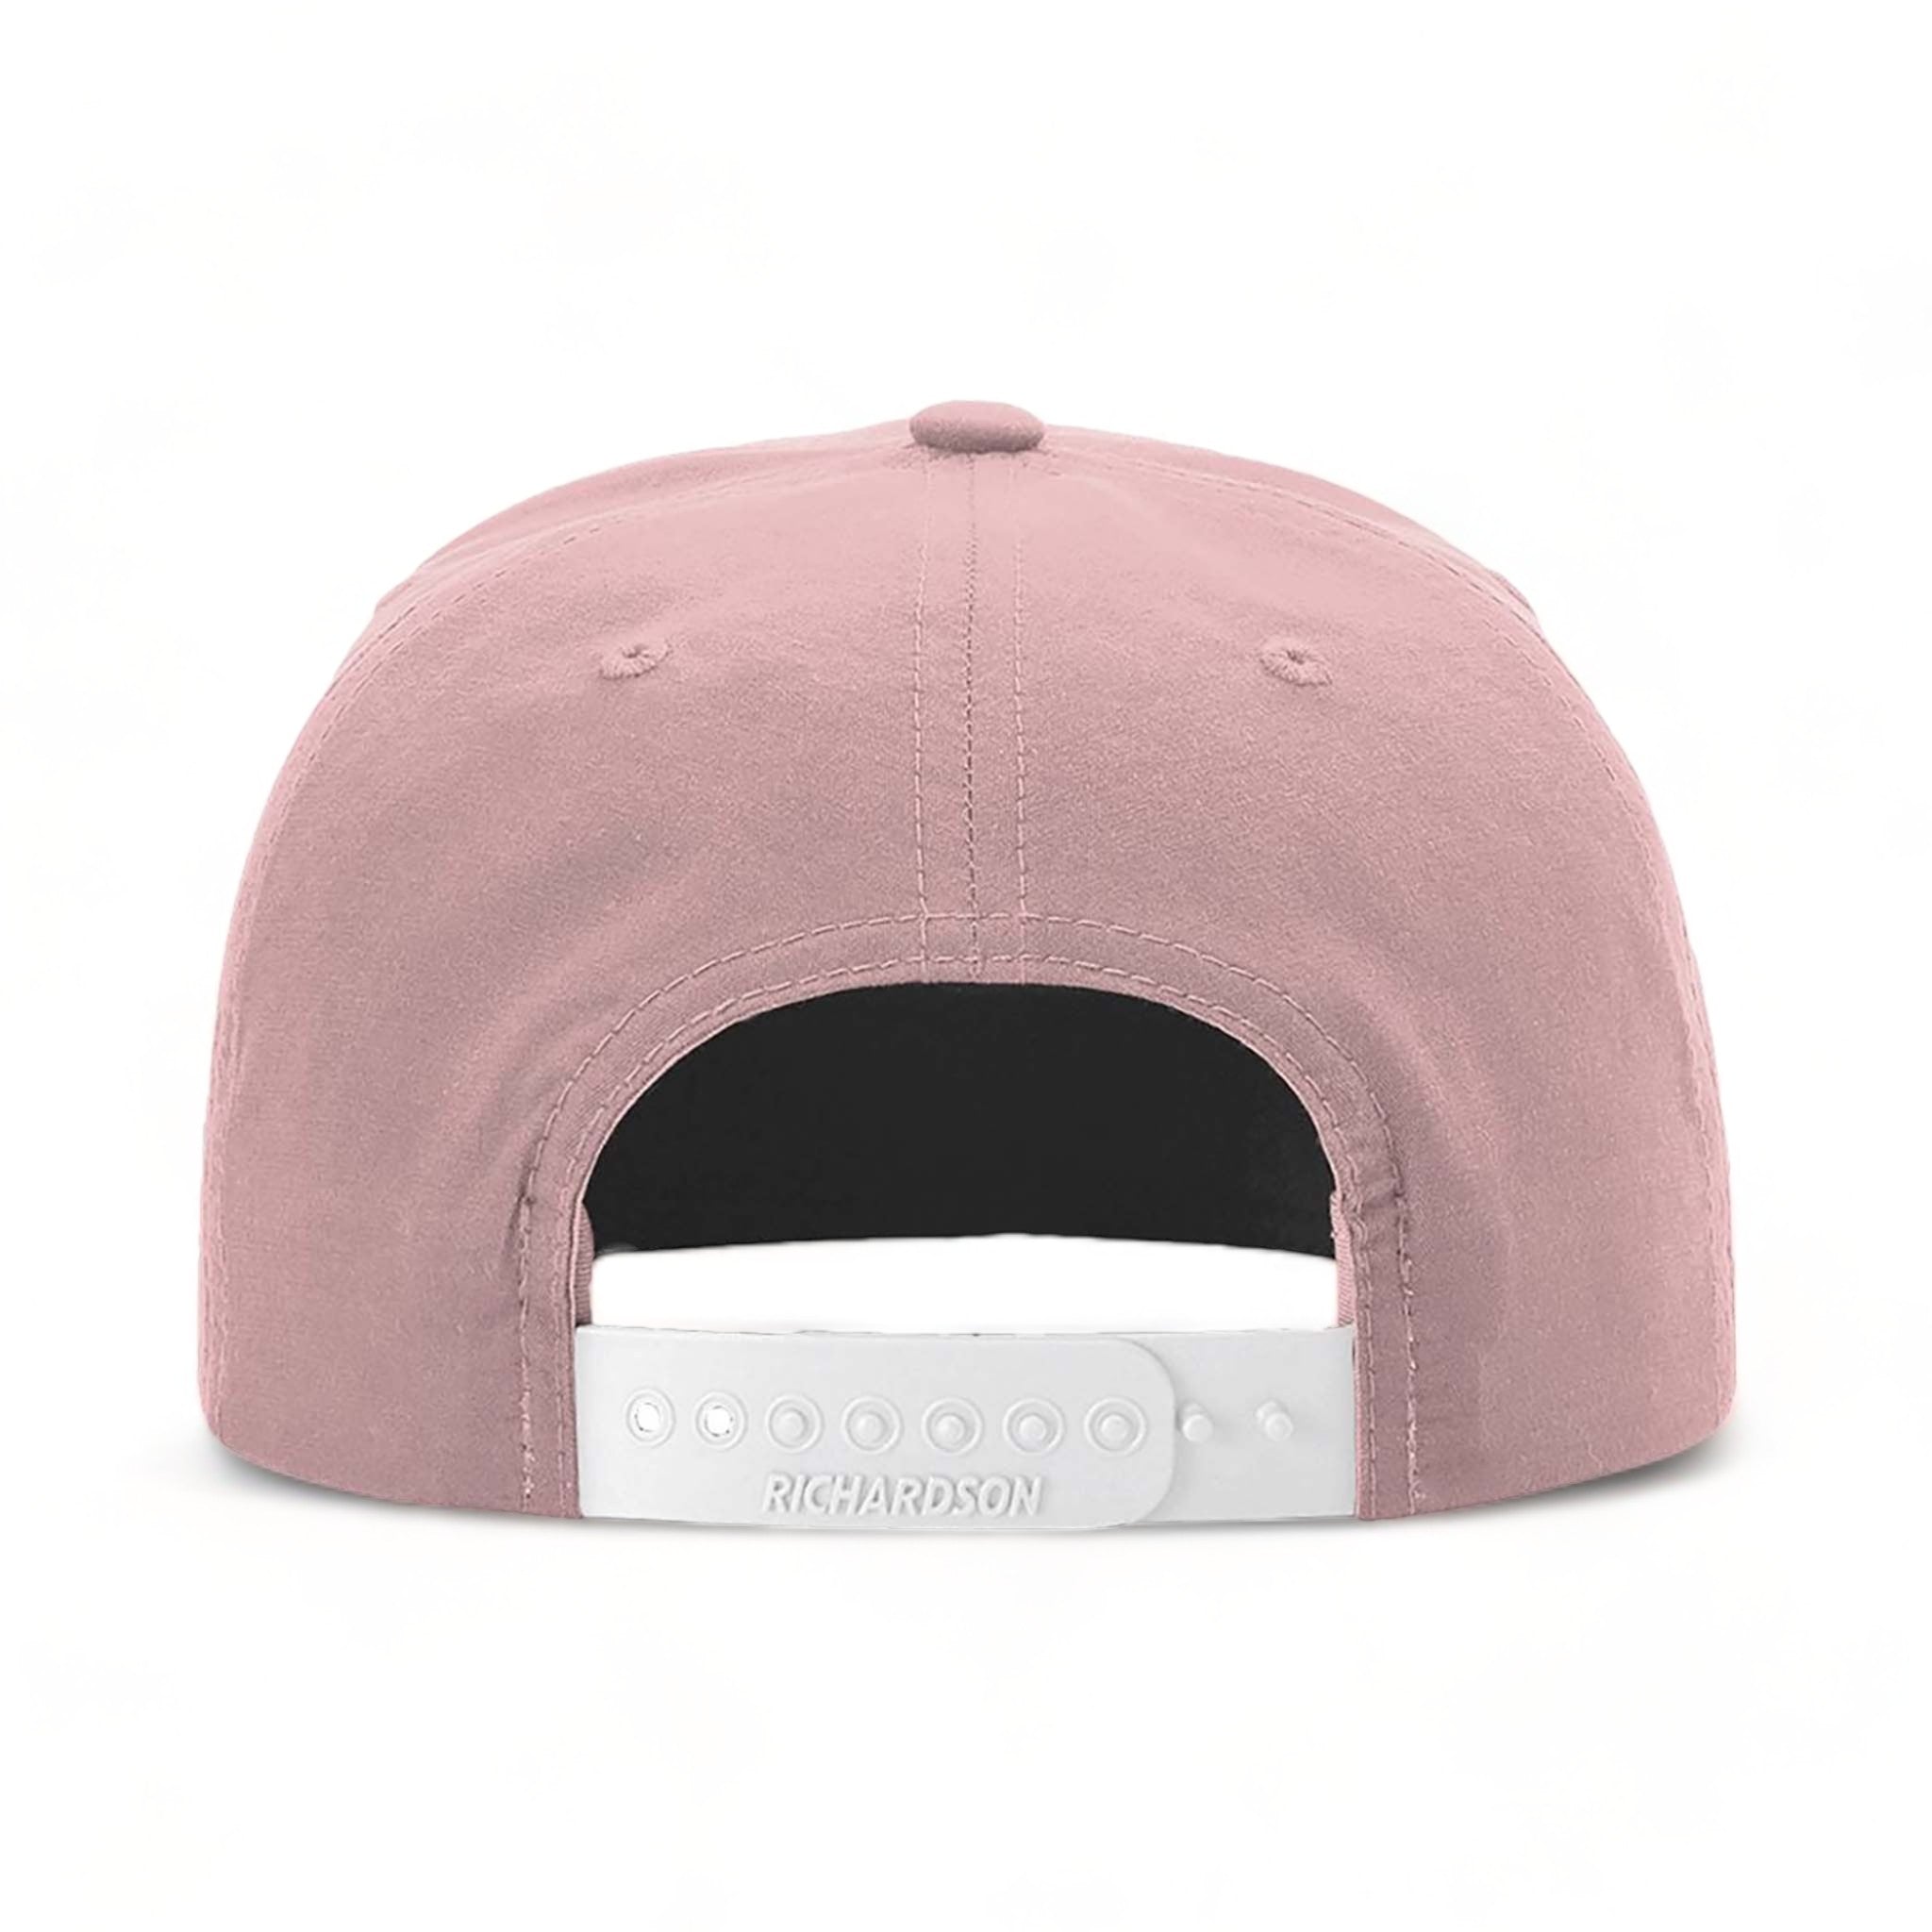 Back view of Richardson 256 custom hat in pale peach and maroon